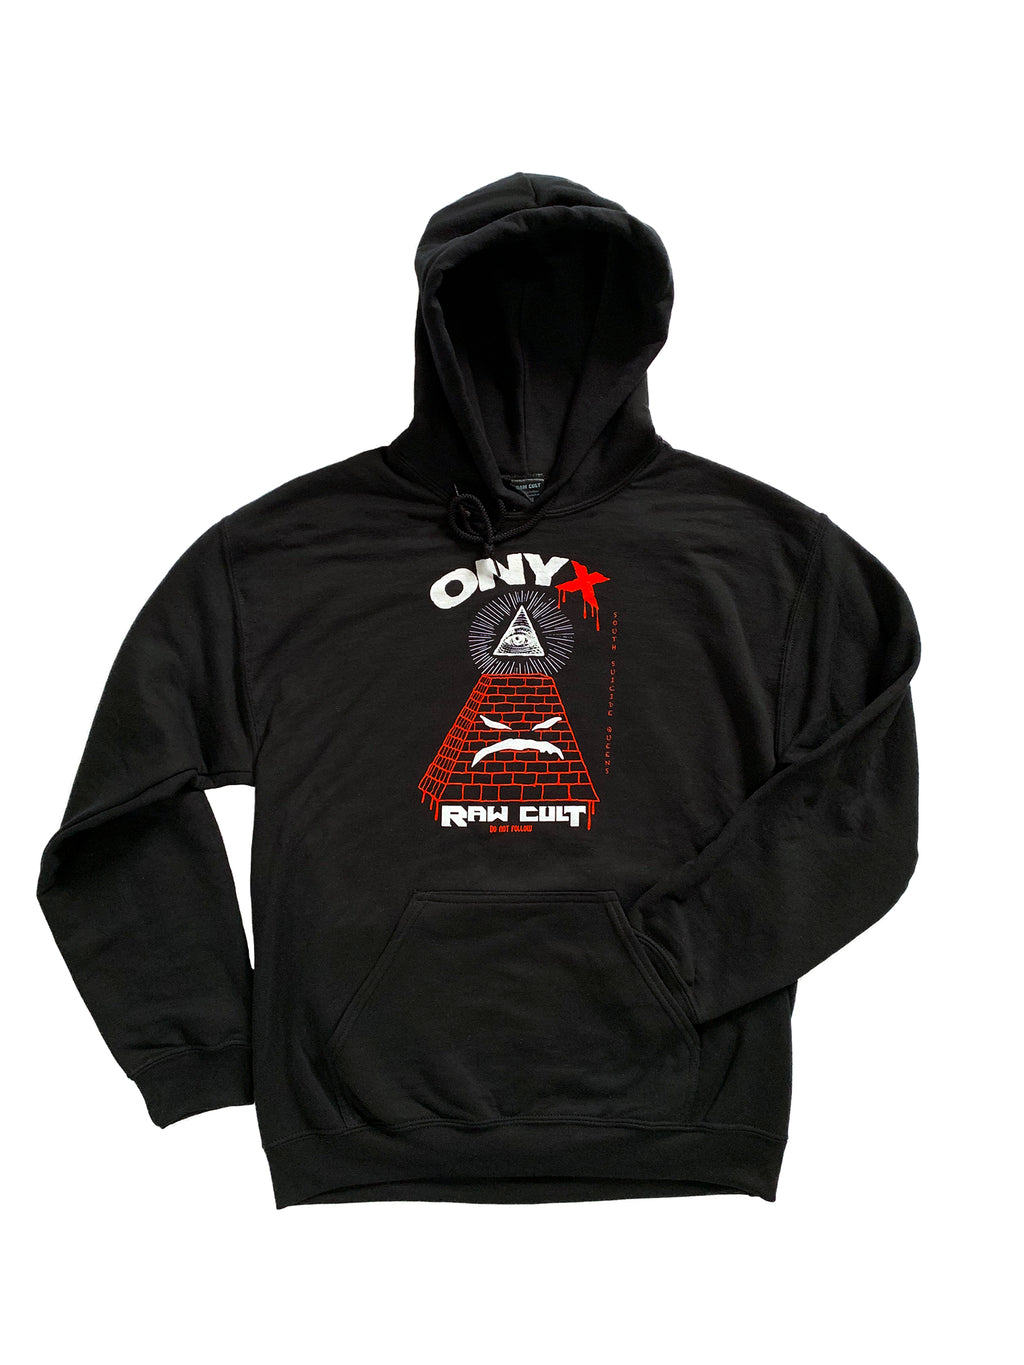 RAW CULT x ONYX - South Suicide Queens/Do Not Follow Hoodie (Black)